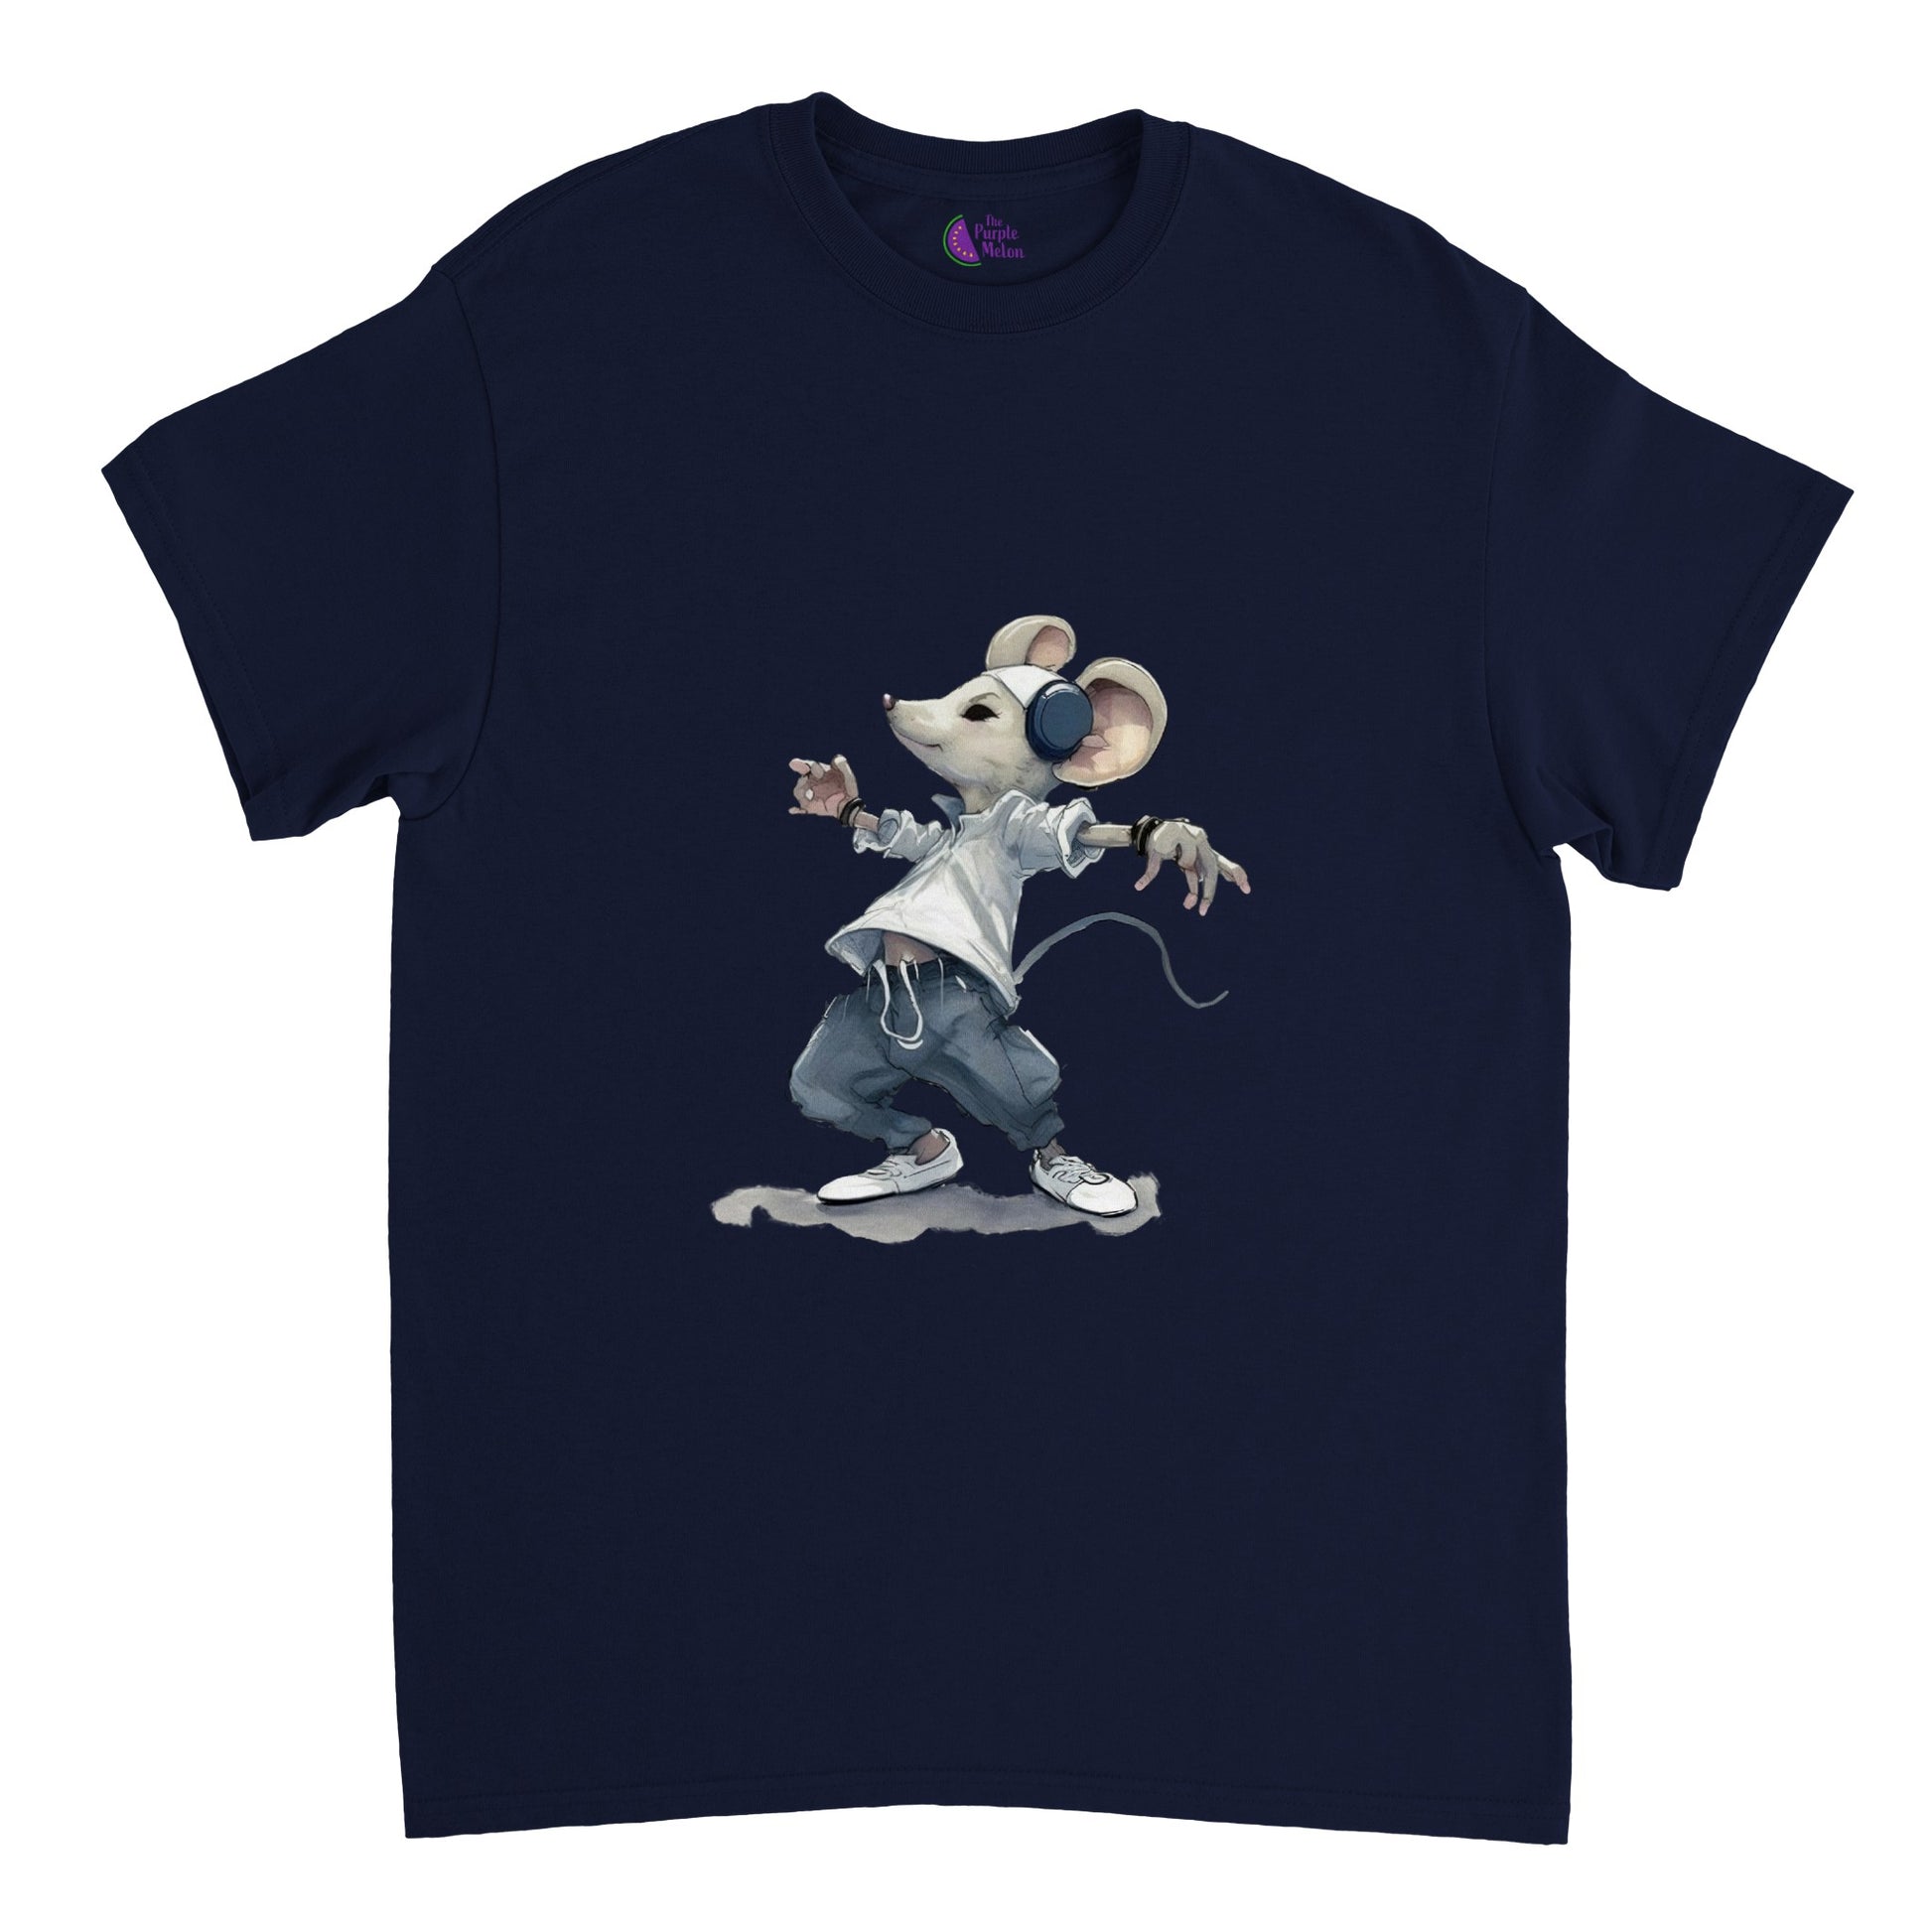 Navy t-shirt with a hip hop mouse print